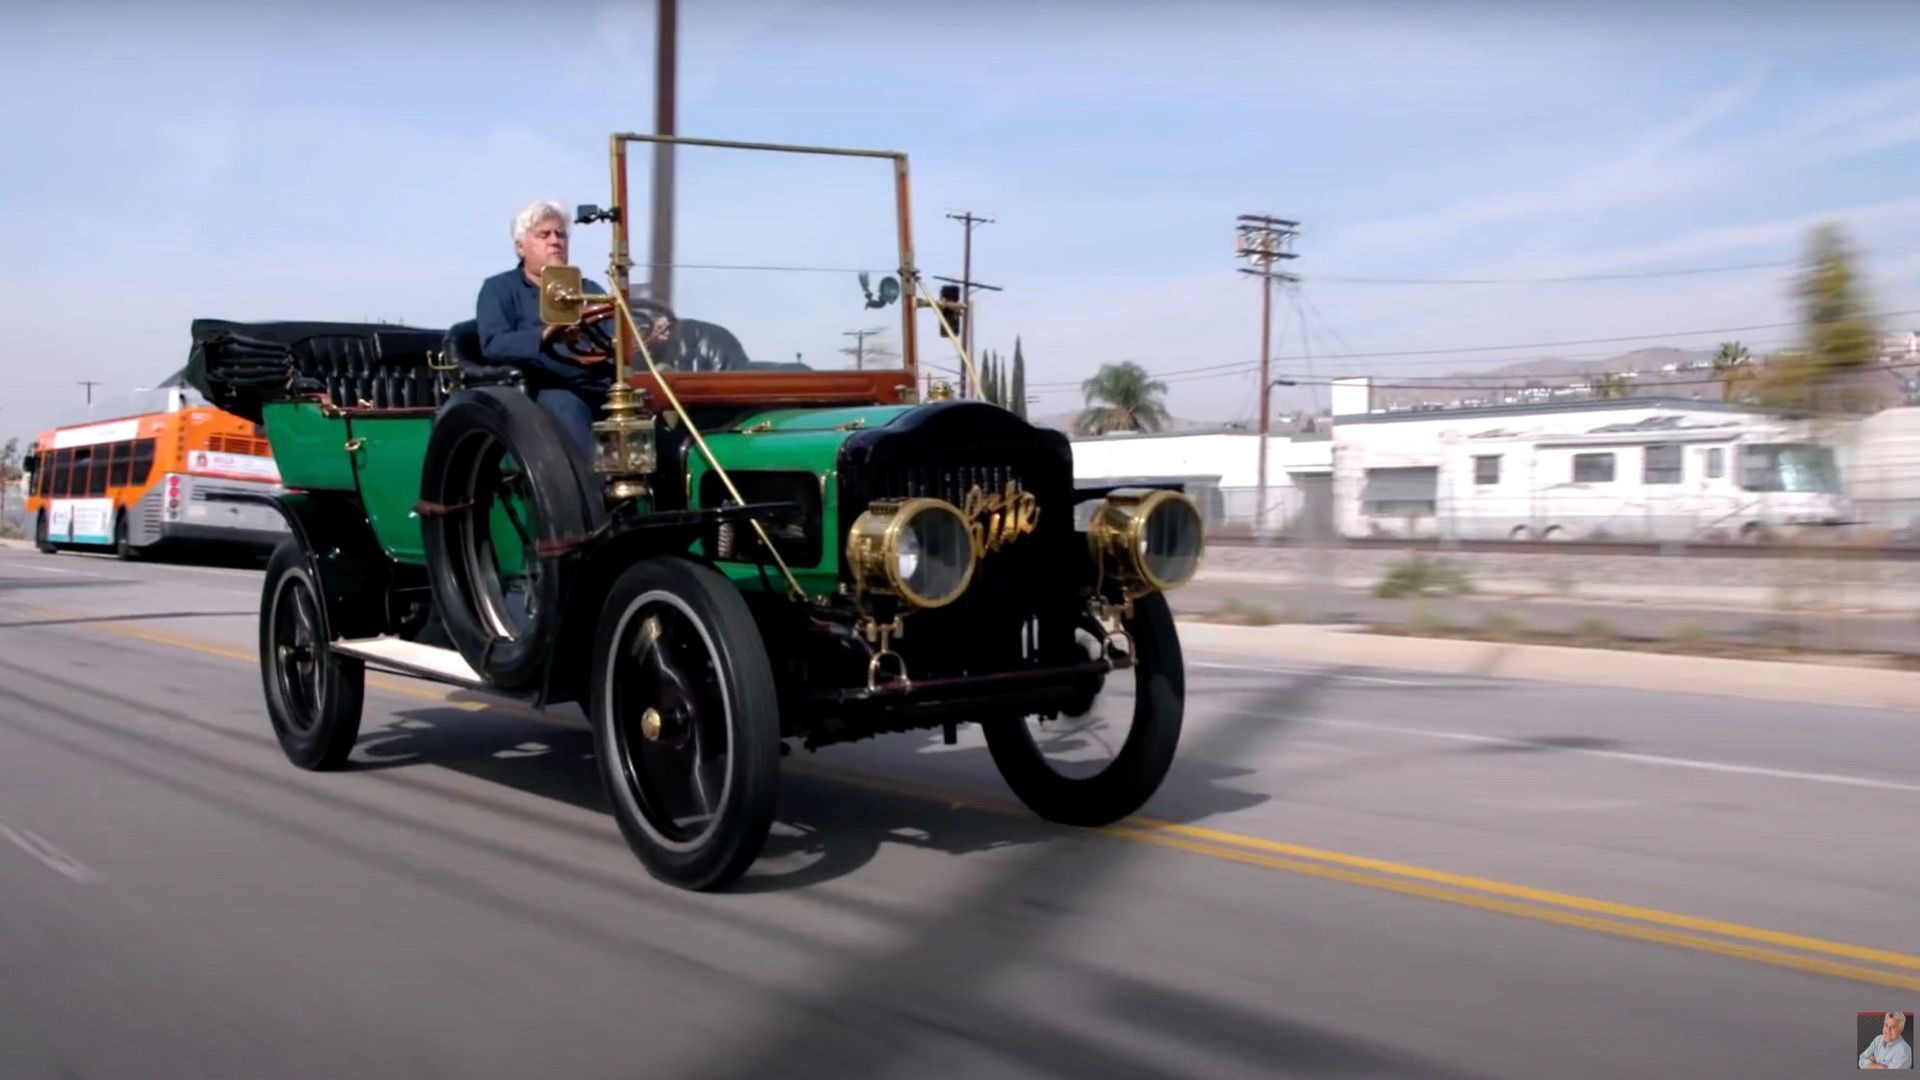 1909 Cleveland White Steam Car Shows Off 1900s Tech